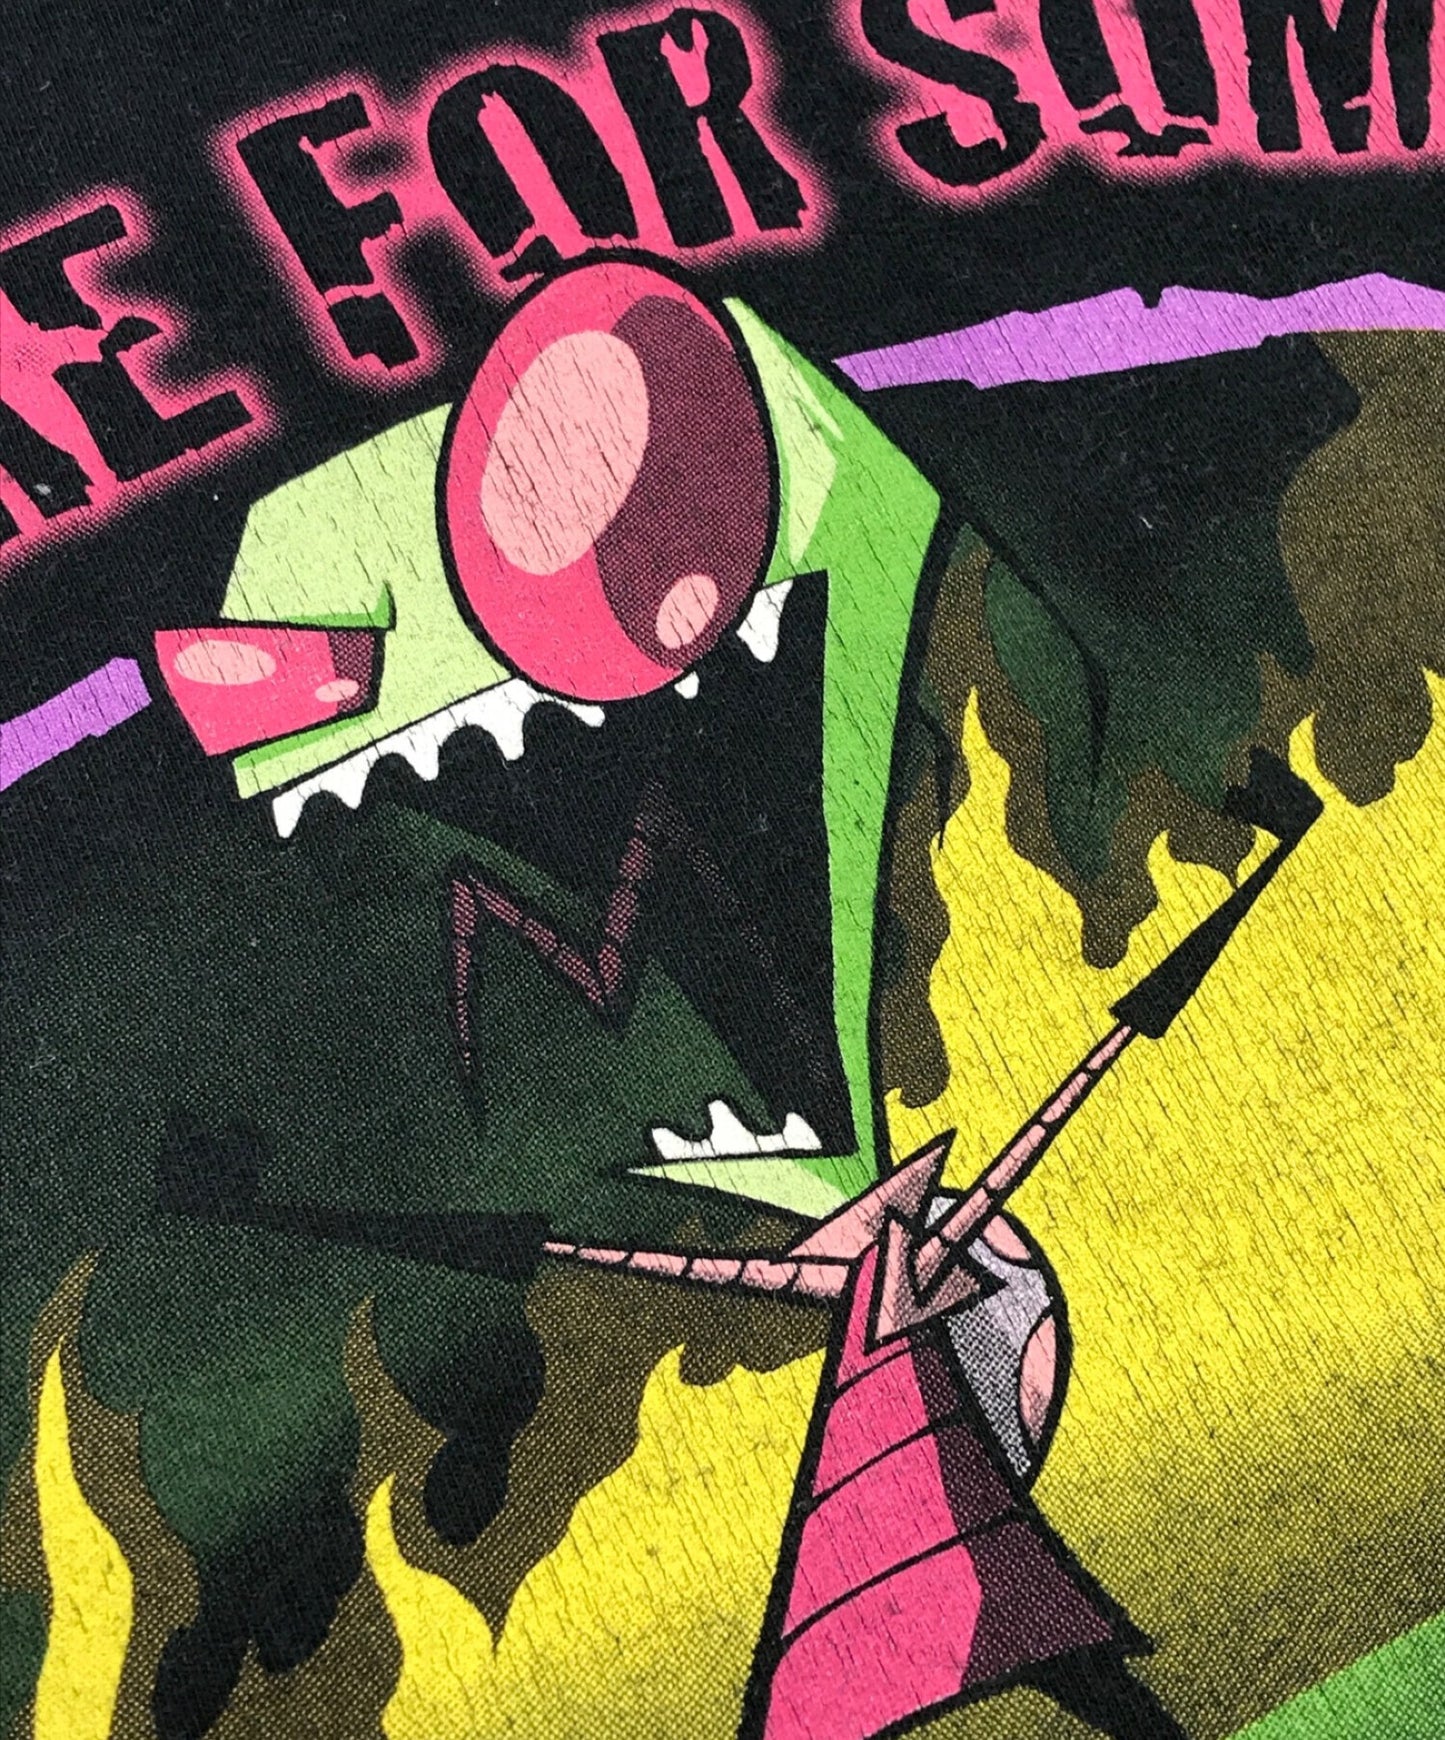 INVADER ZIM [Secondhand Clothing] Anime Tee